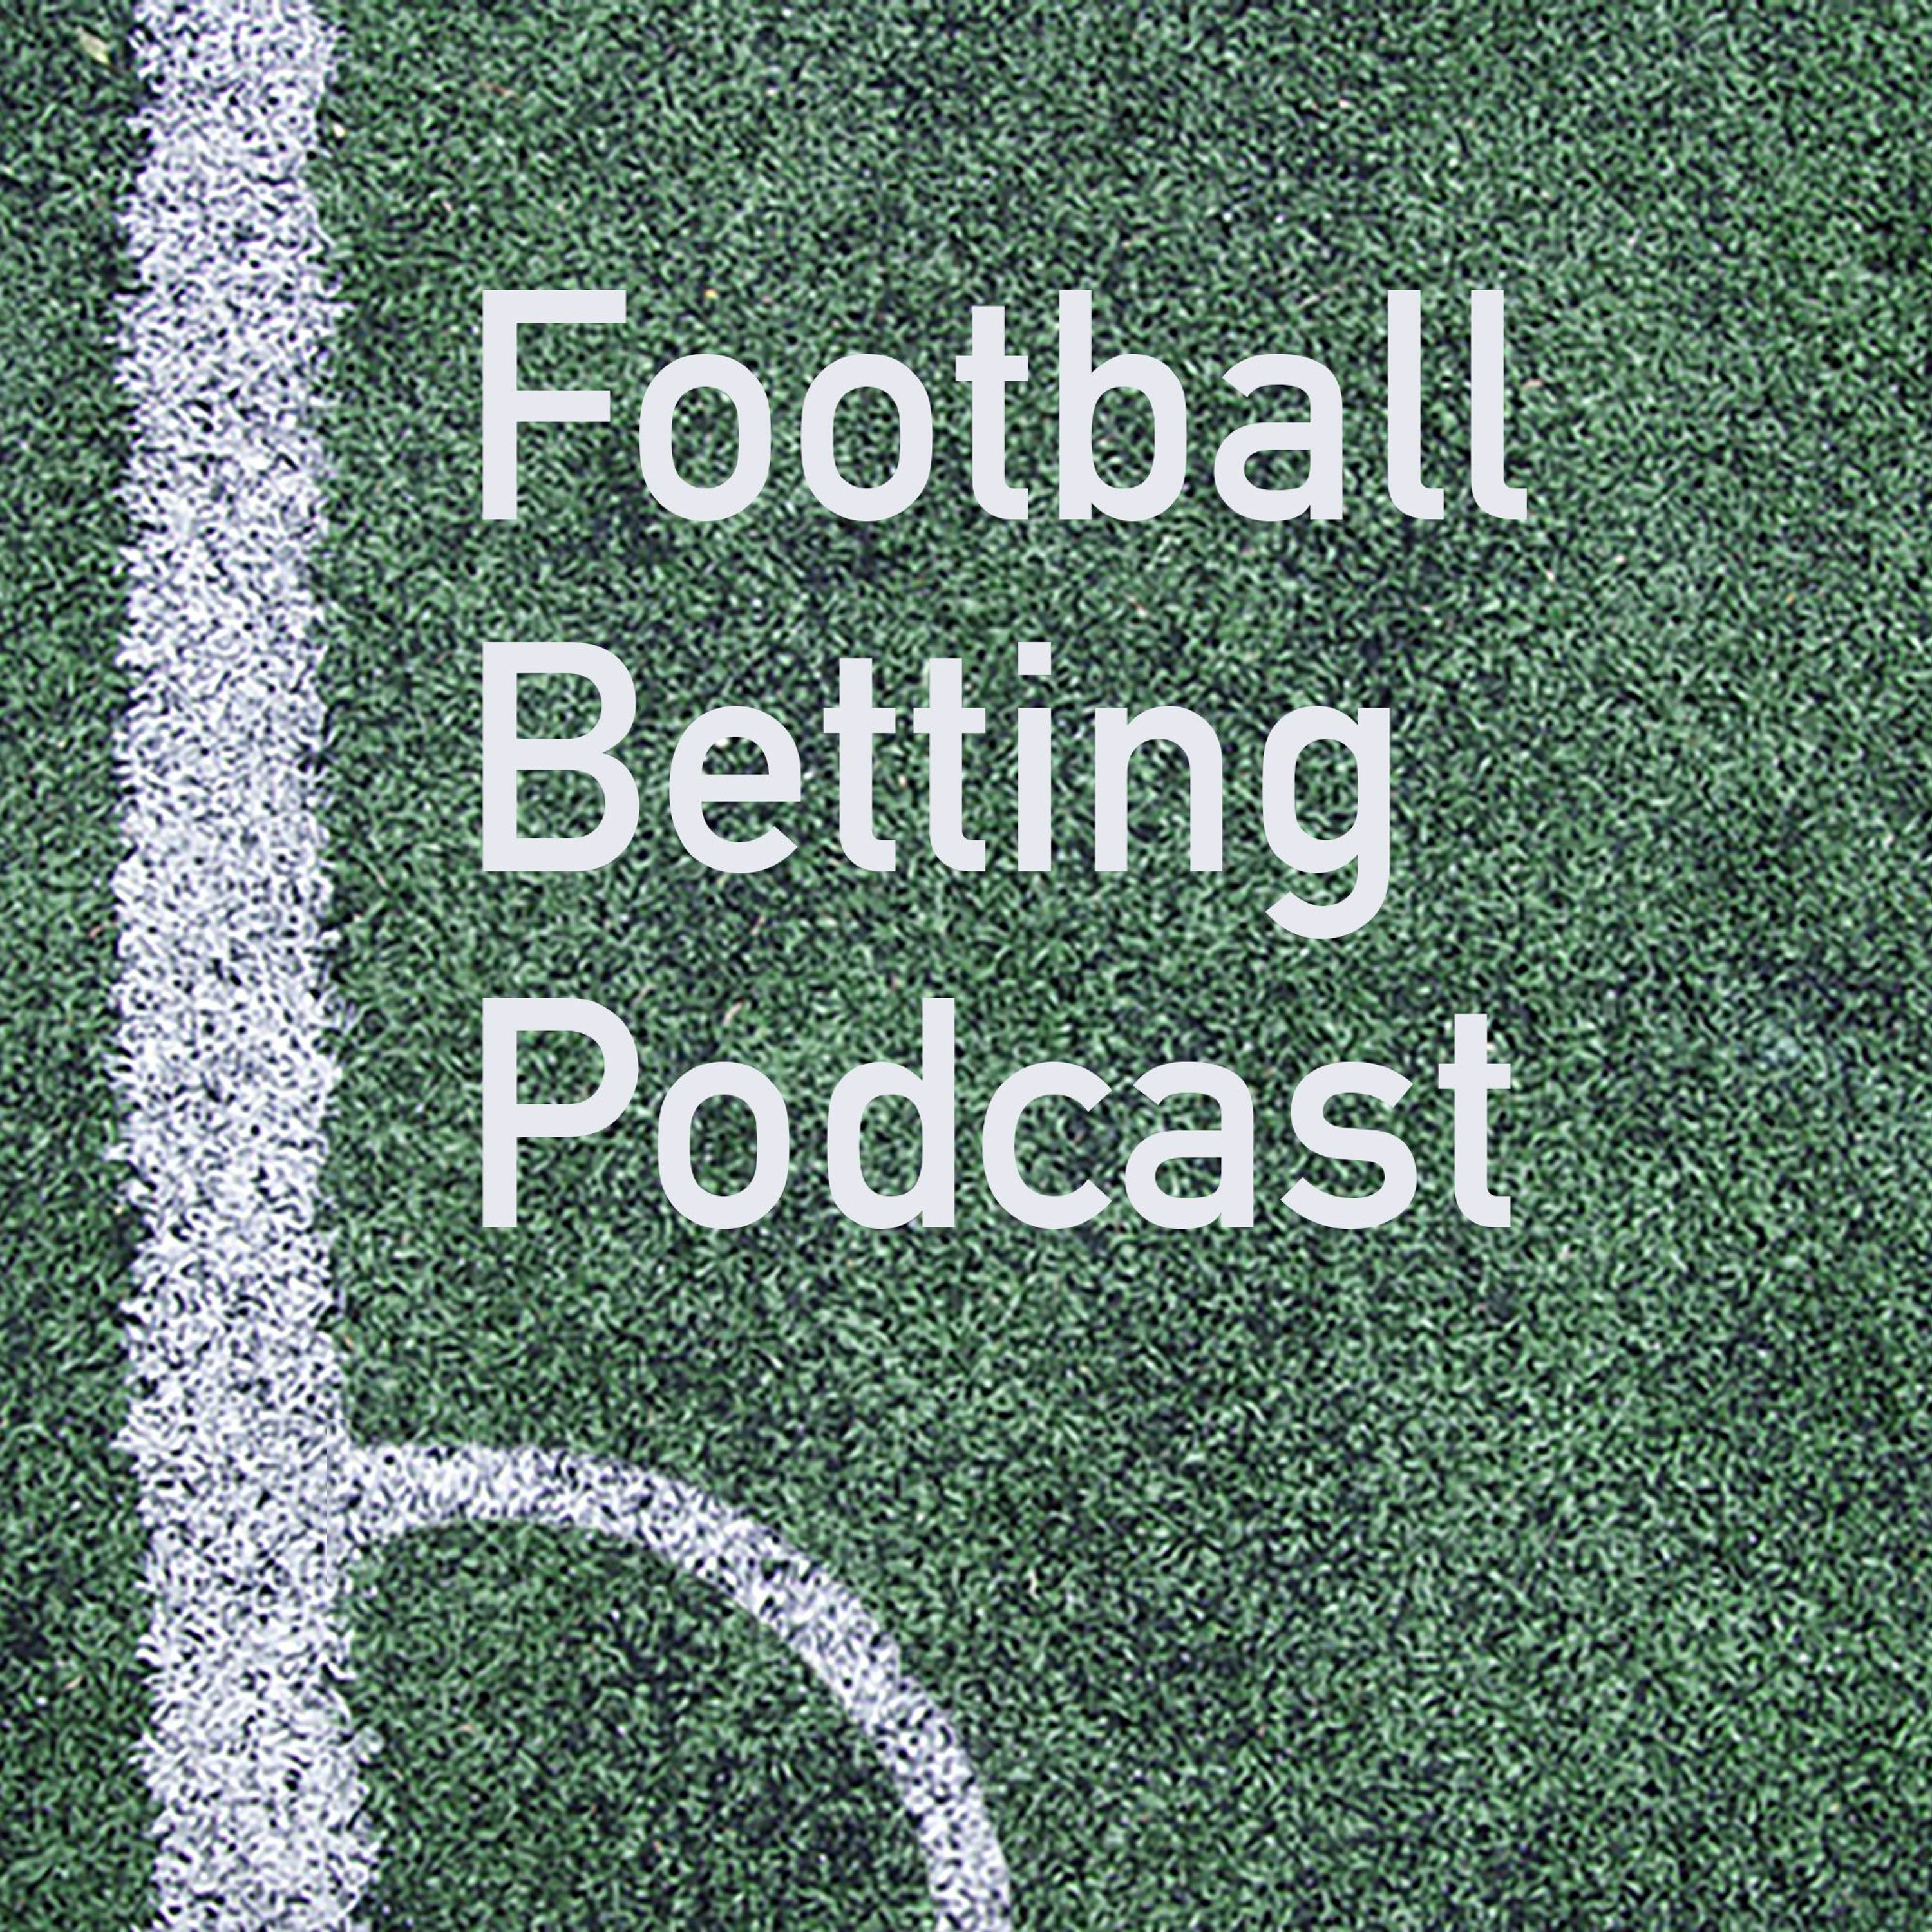 26th - 28th January:  Weekend football betting preview